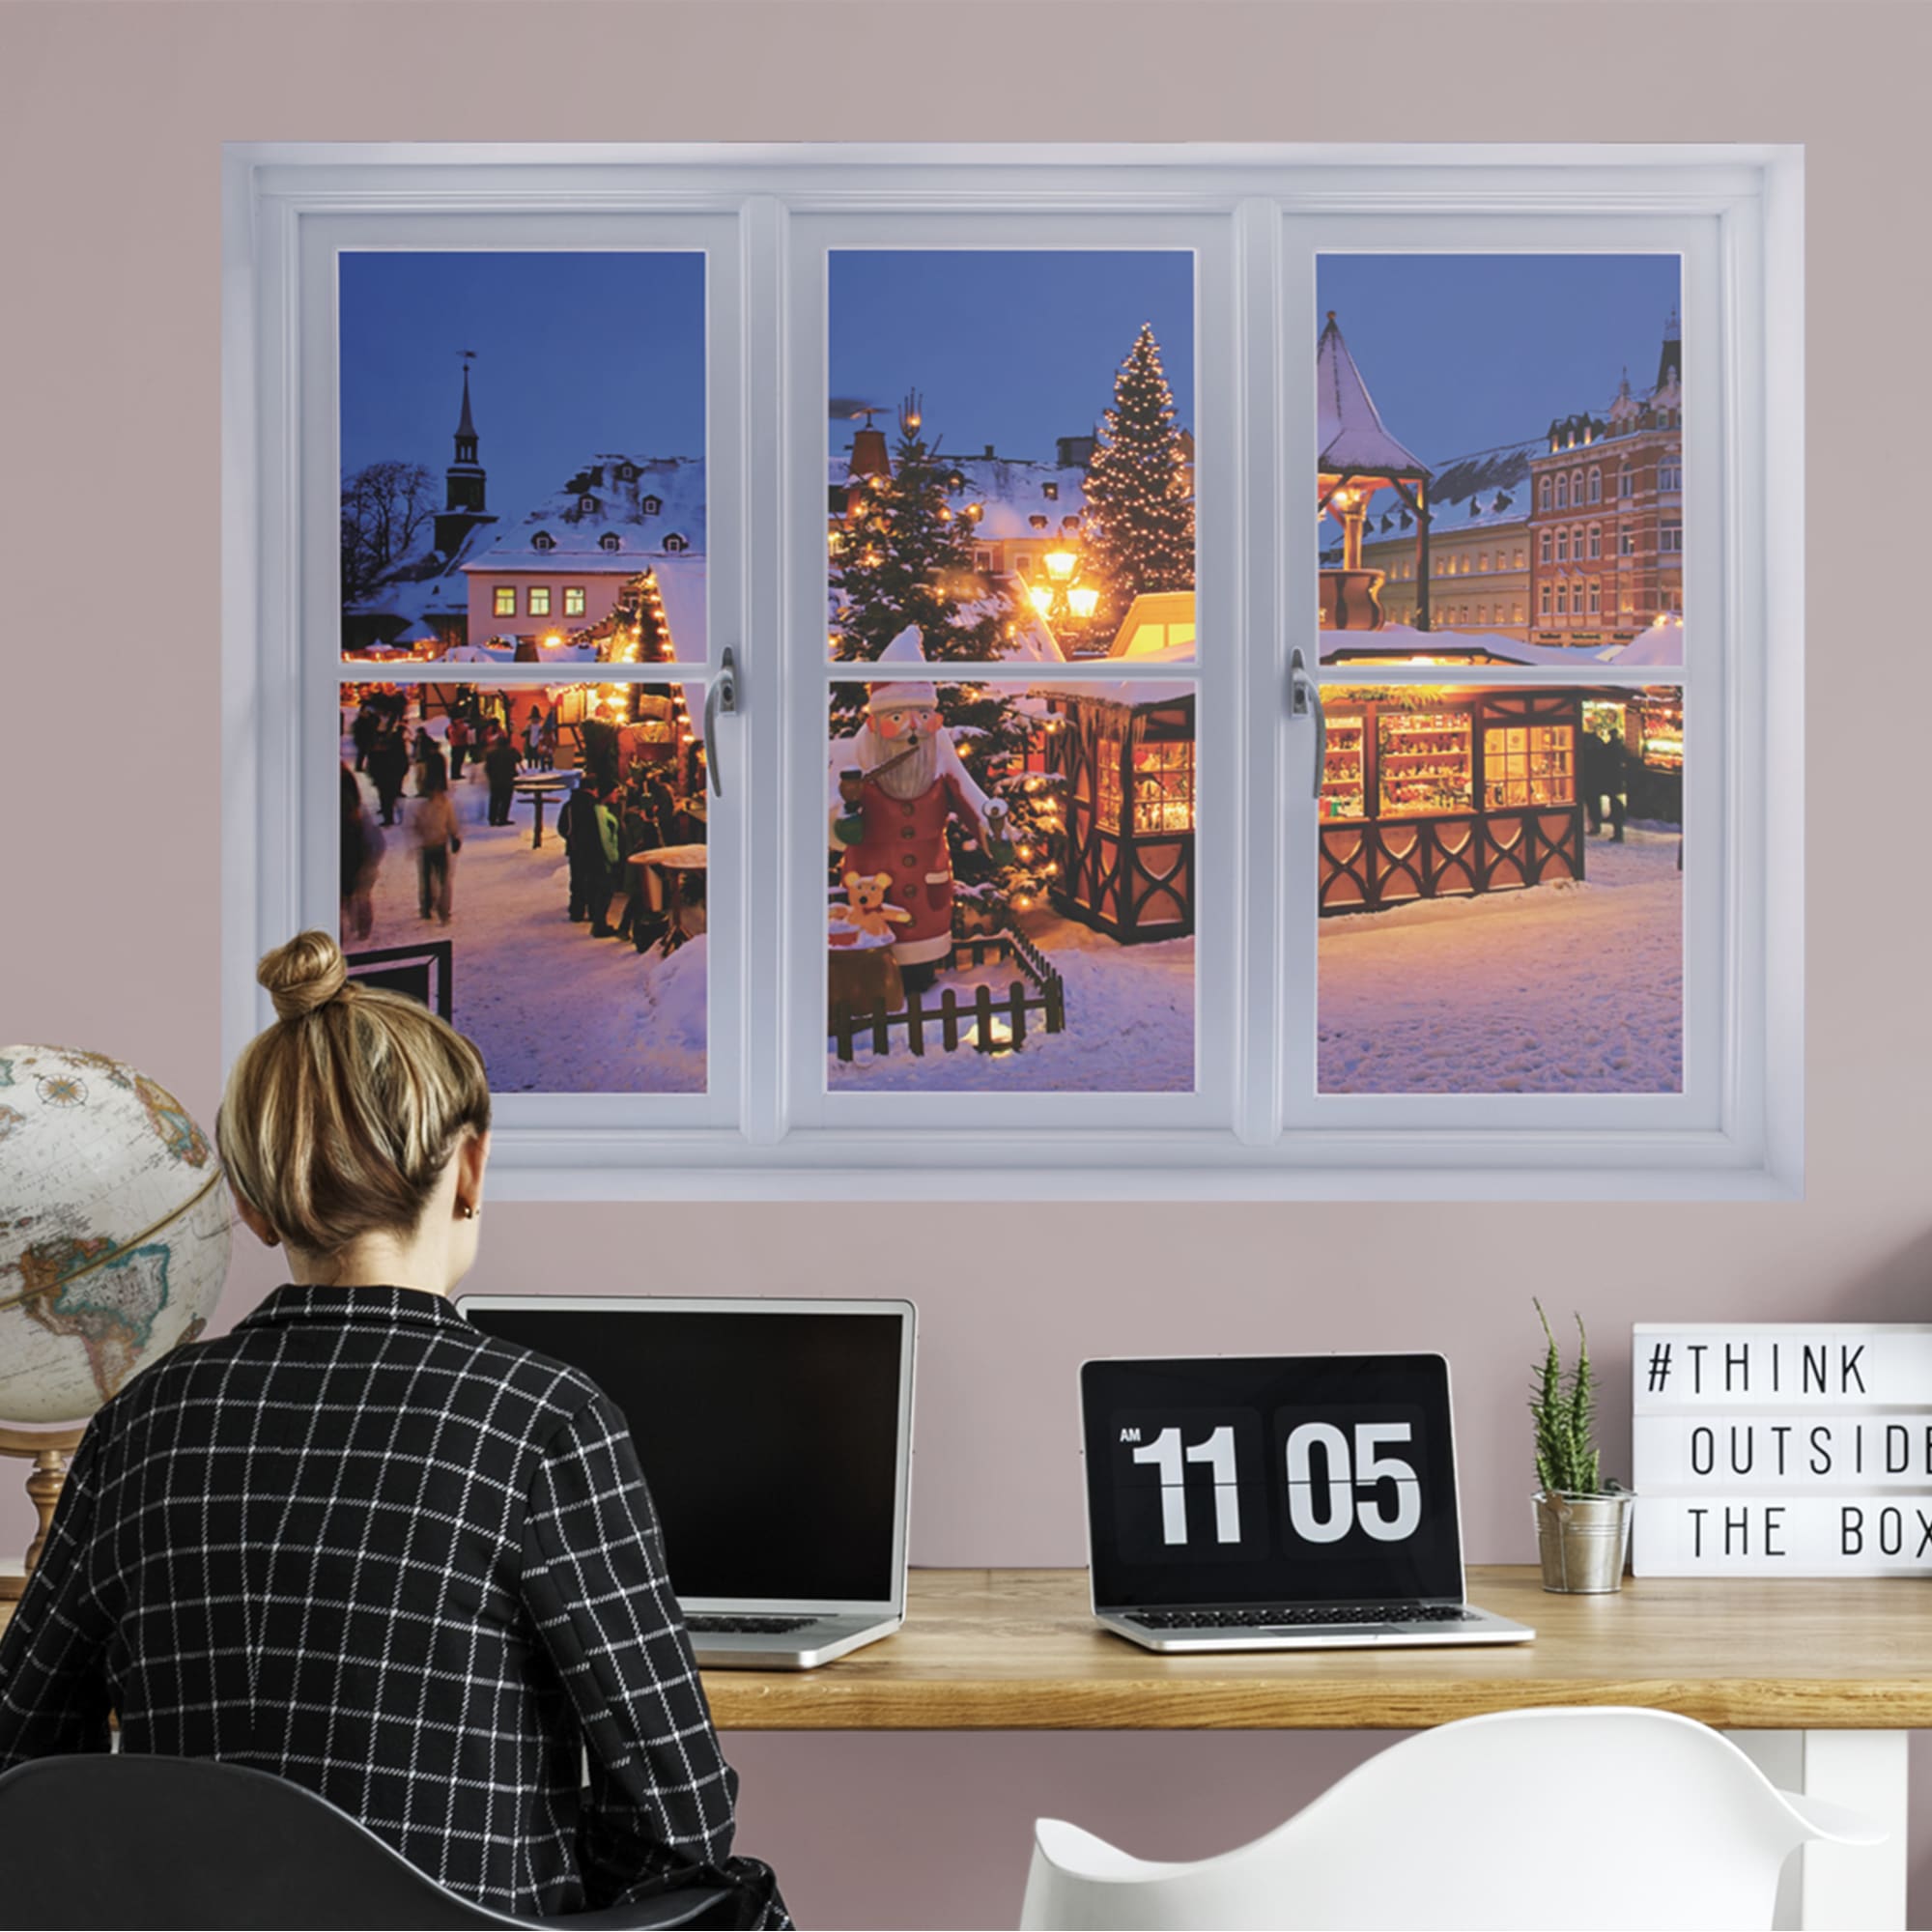 Instant Window: Christmas Market at Night - Removable Wall Graphic 51.0"W x 34.0"H by Fathead | Vinyl